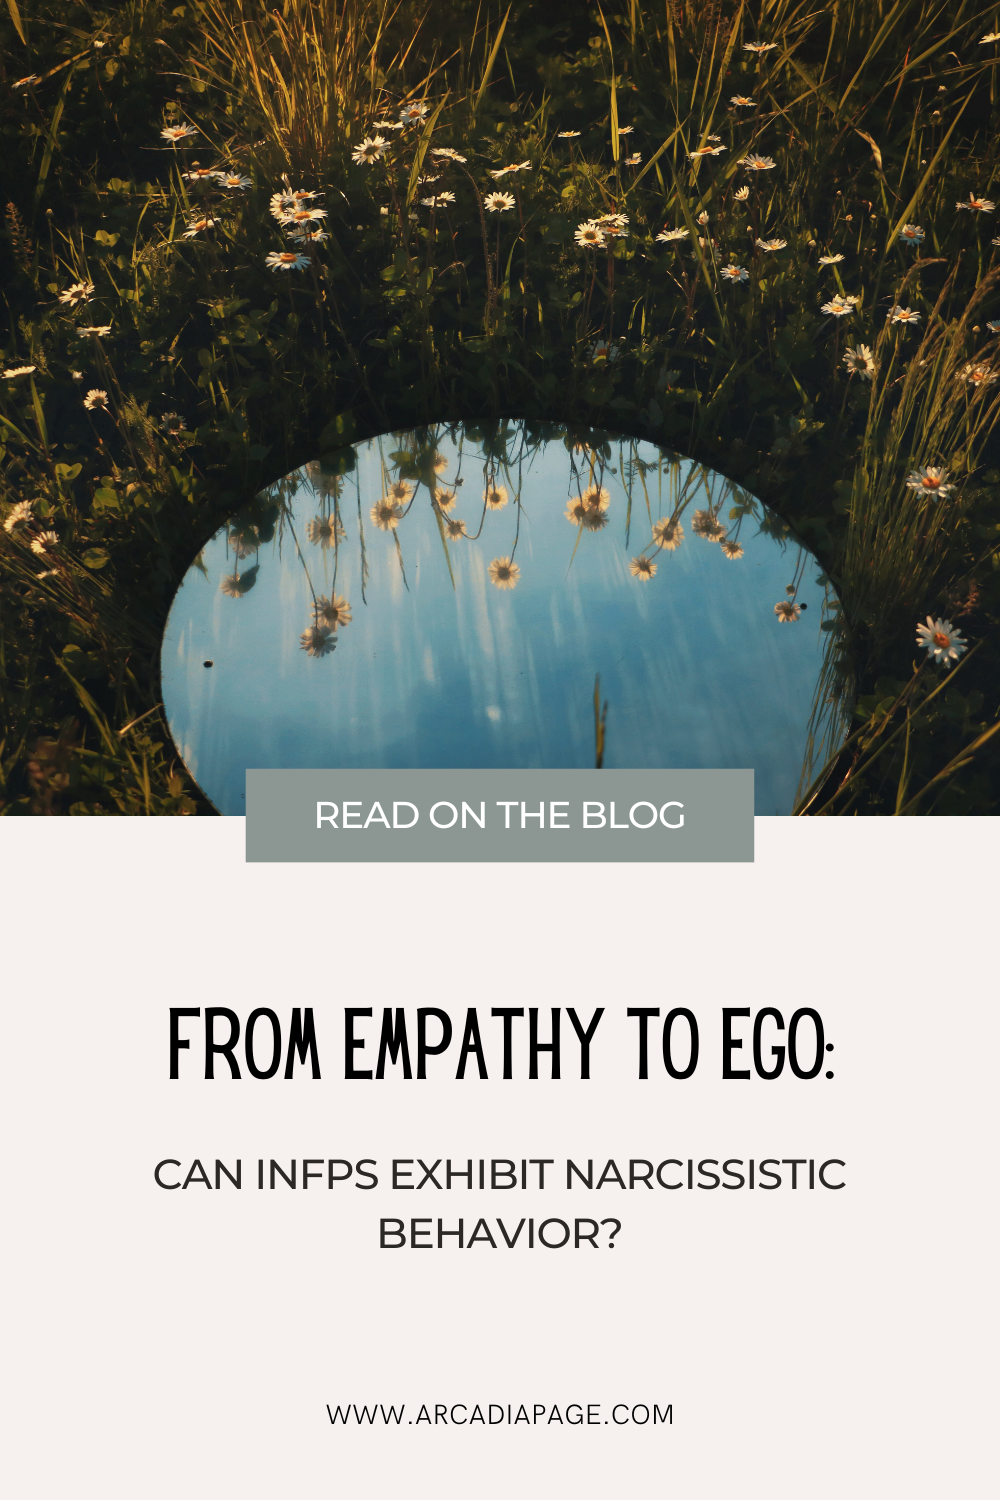 INFP ego, empathy and narcissism